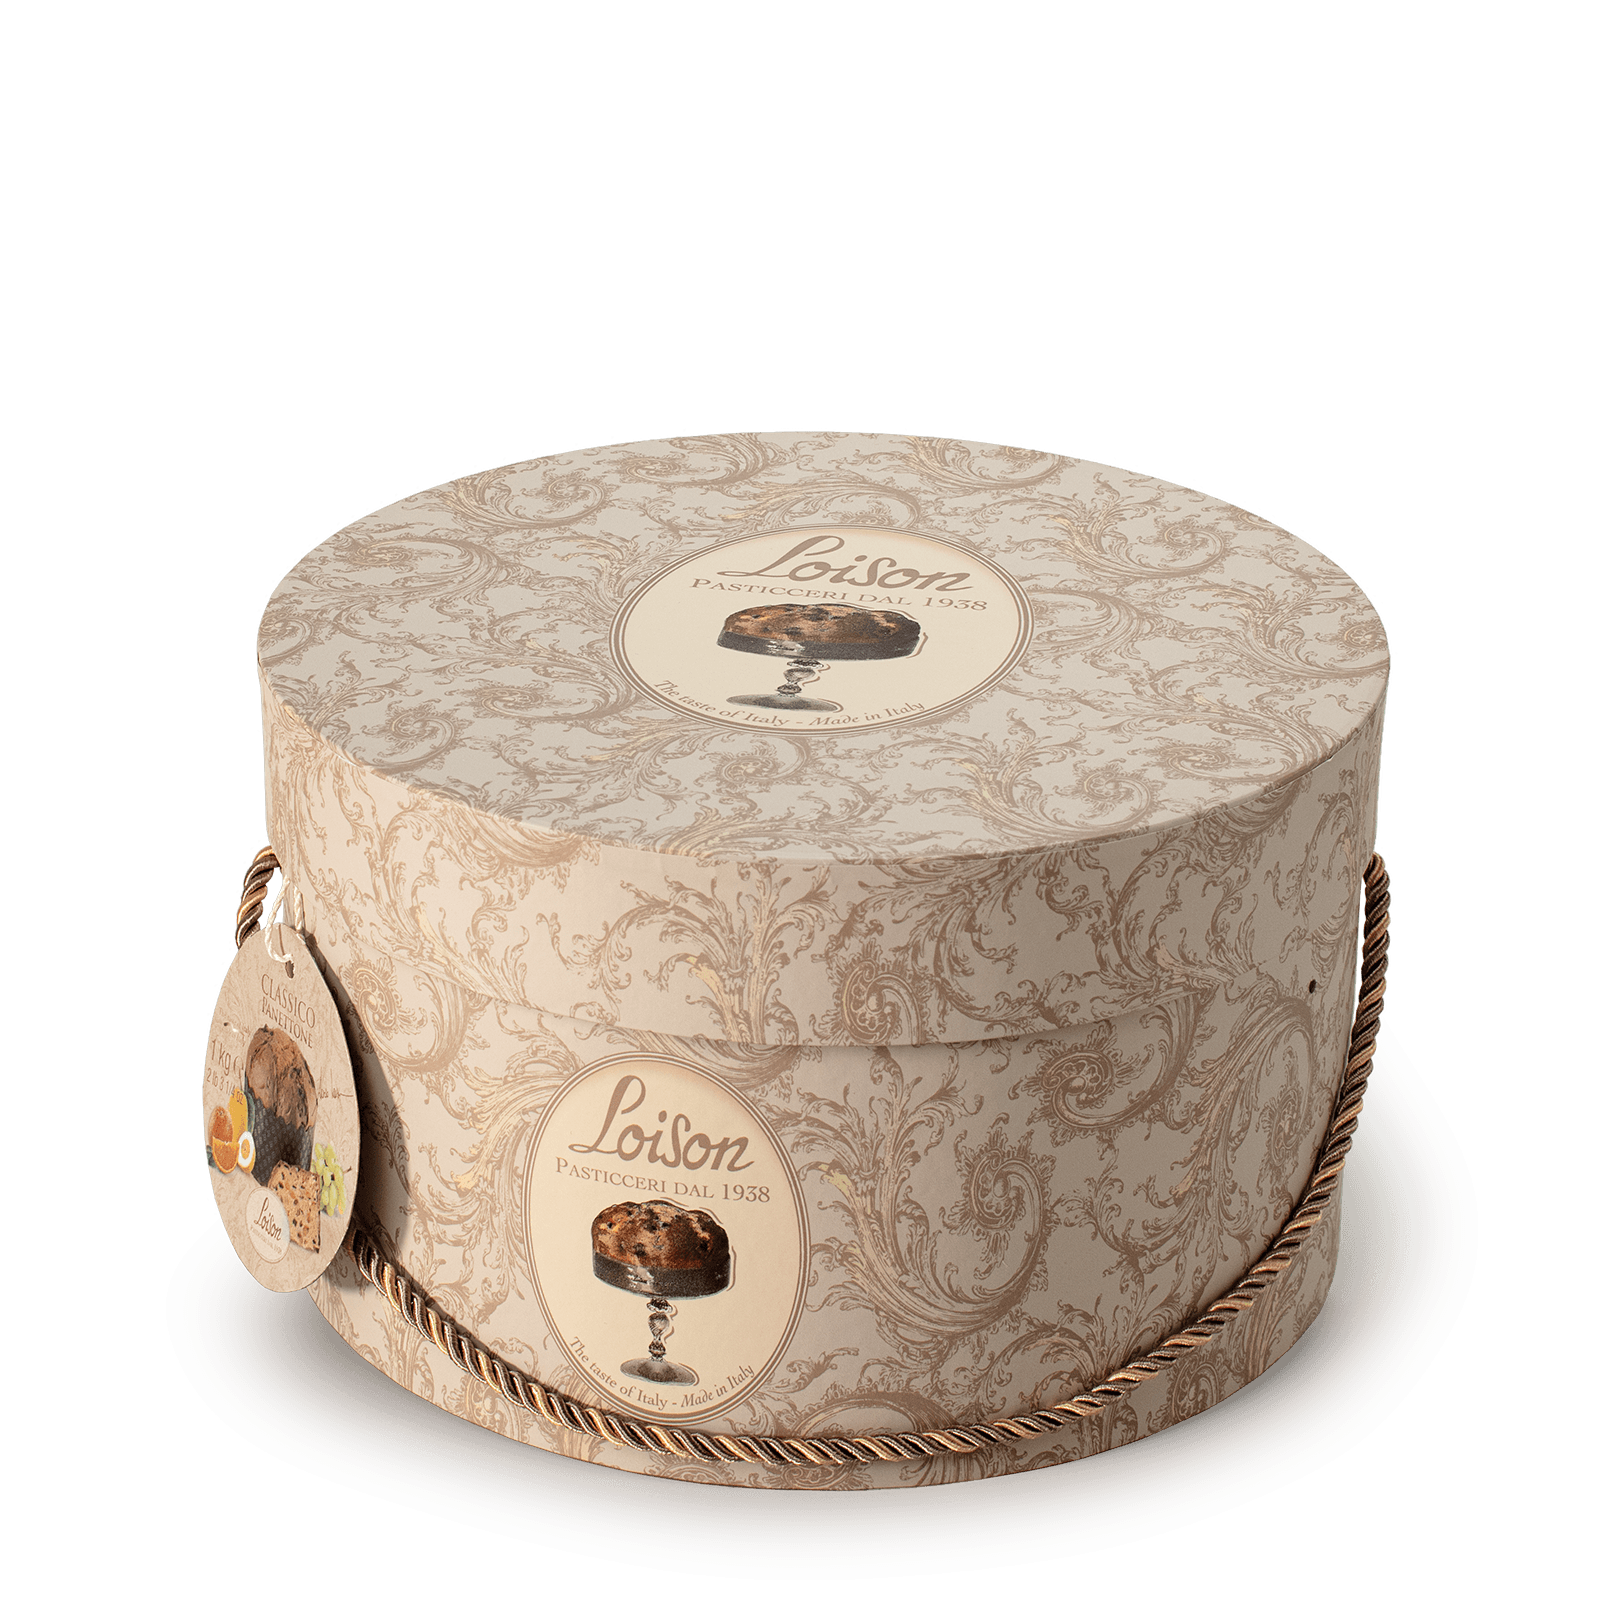 Traditional Artisan Italian Panettone in a hat box Loison